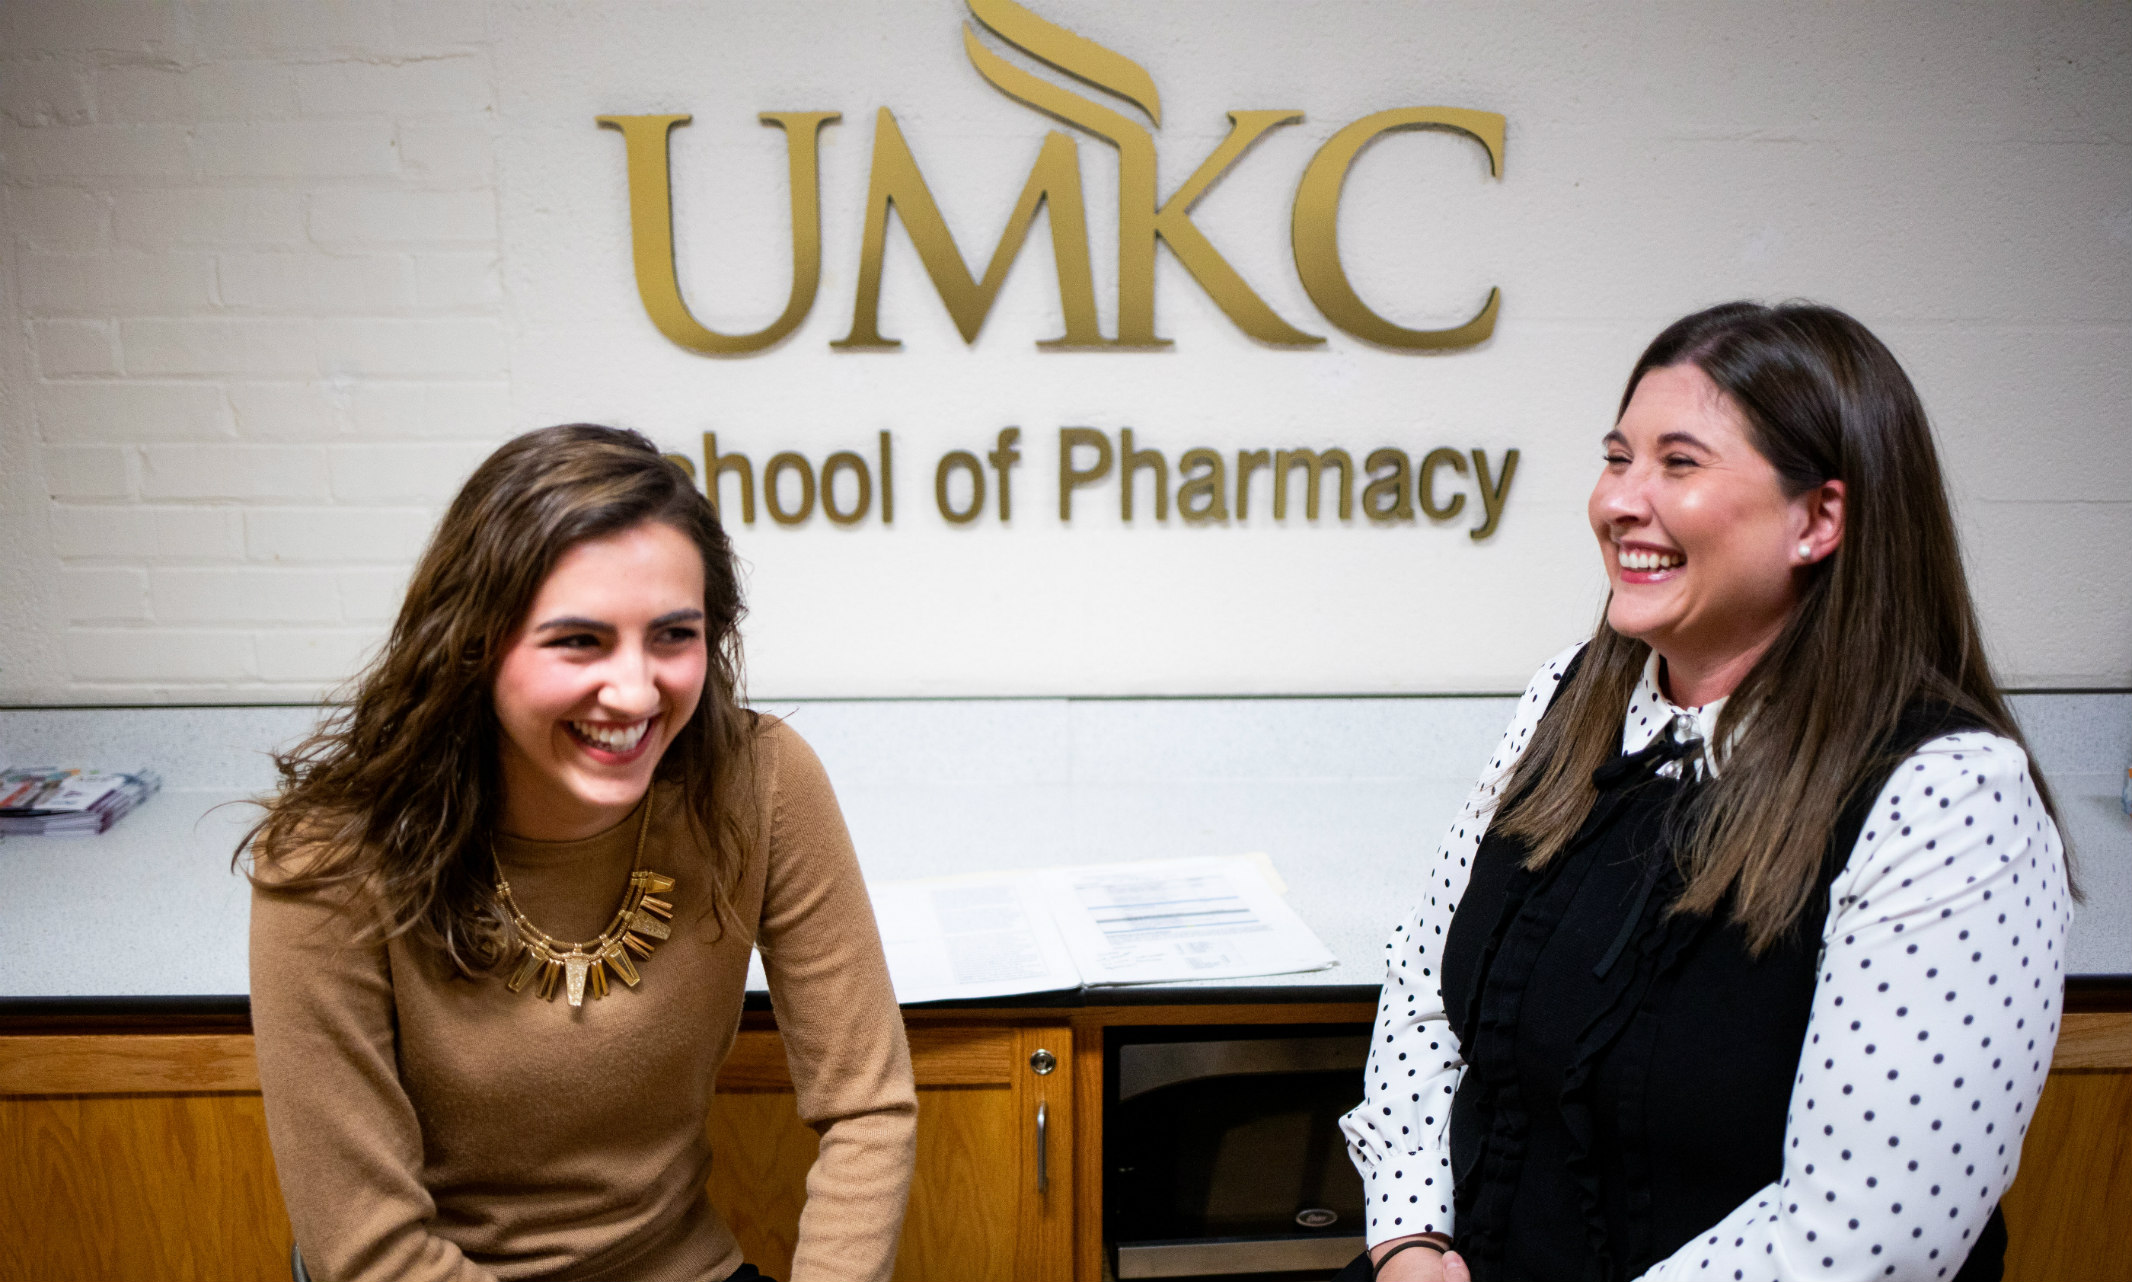 Two women sit in front of a UMKC School of Pharmacy wall sign